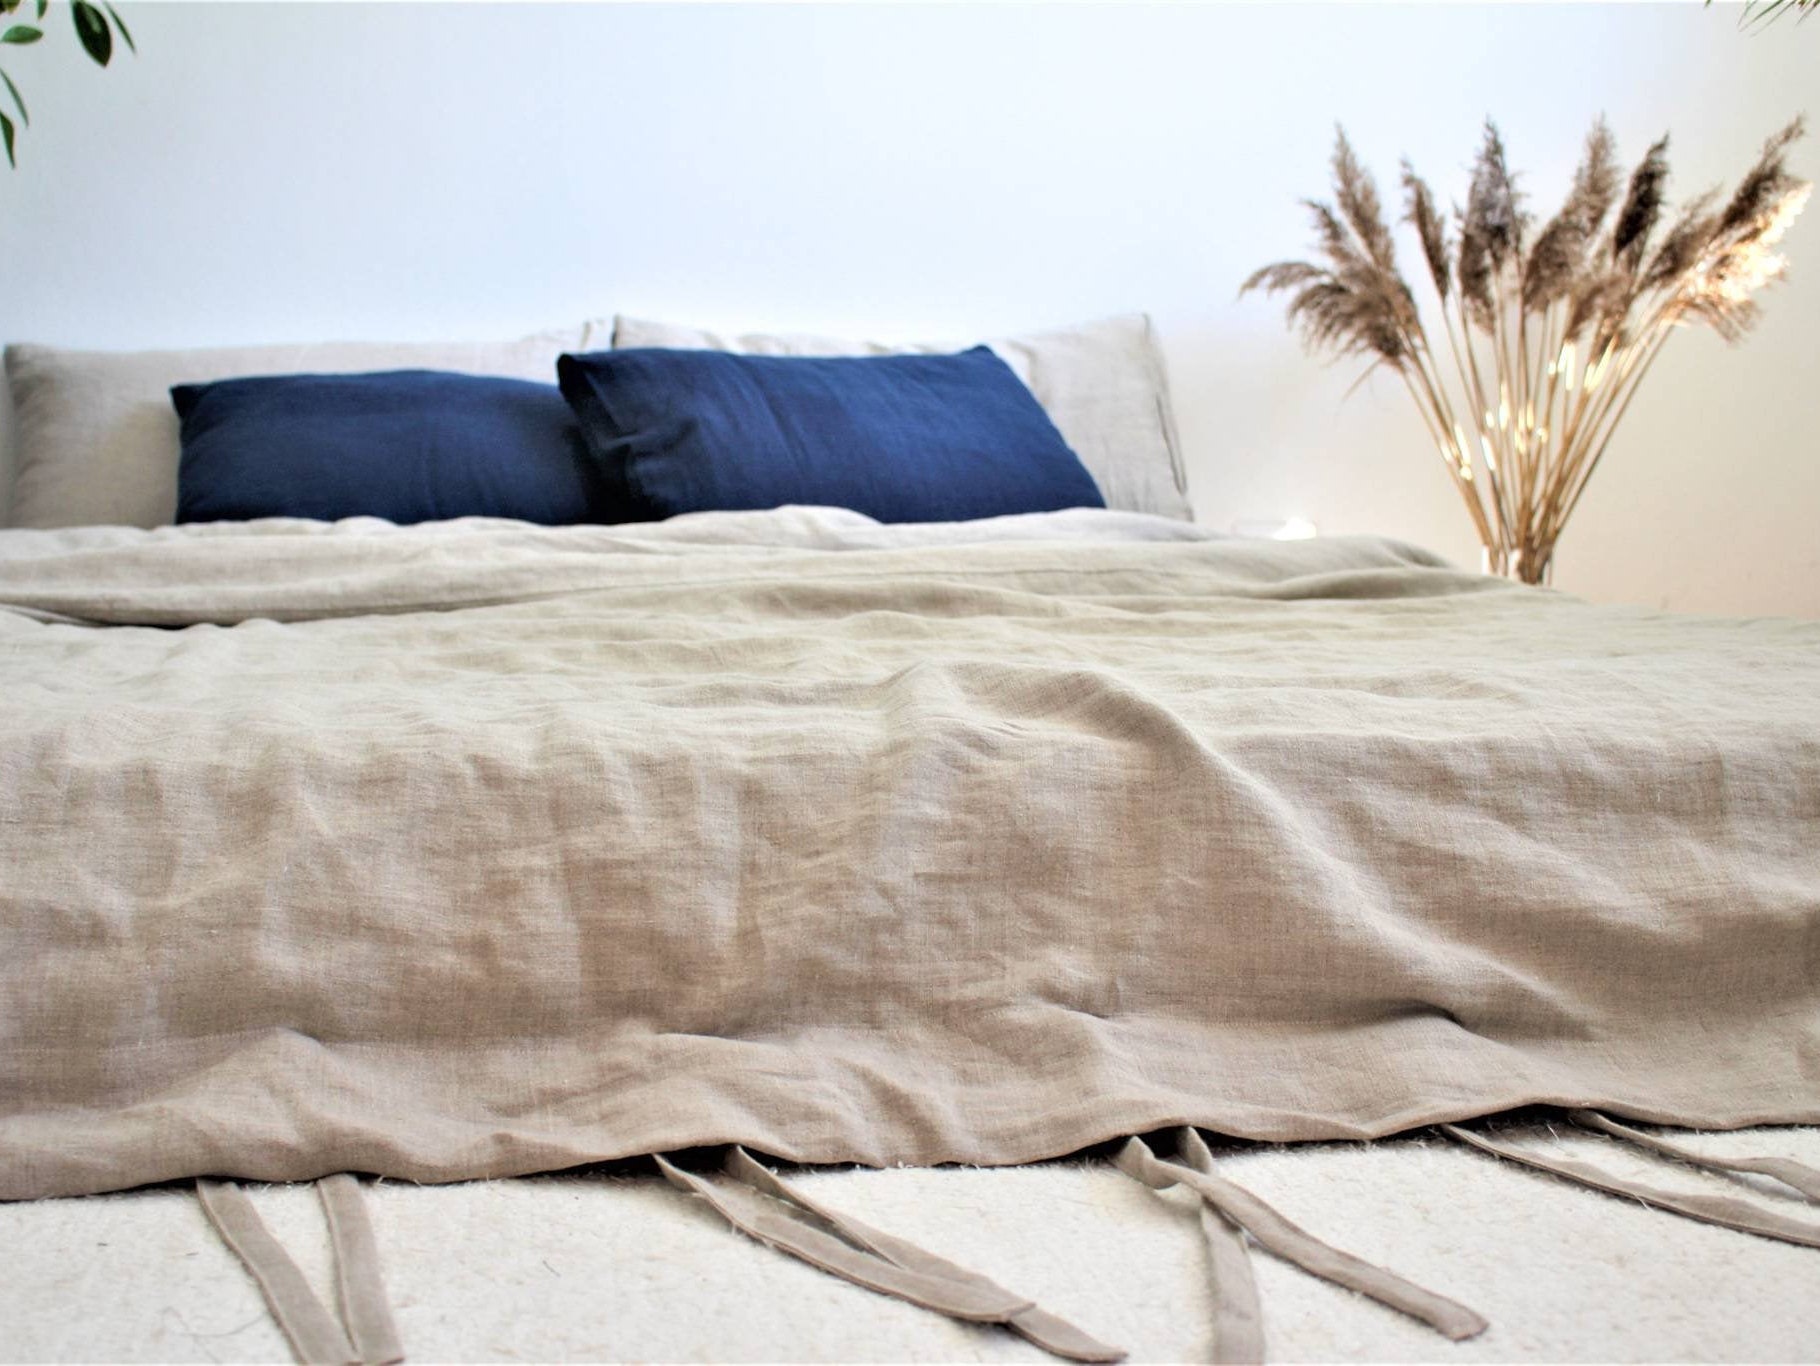 Natural Linen Duvet Cover With Ties in Handmade Of Softened 100% Flax Linen Fabric By Flaxbox Artisans